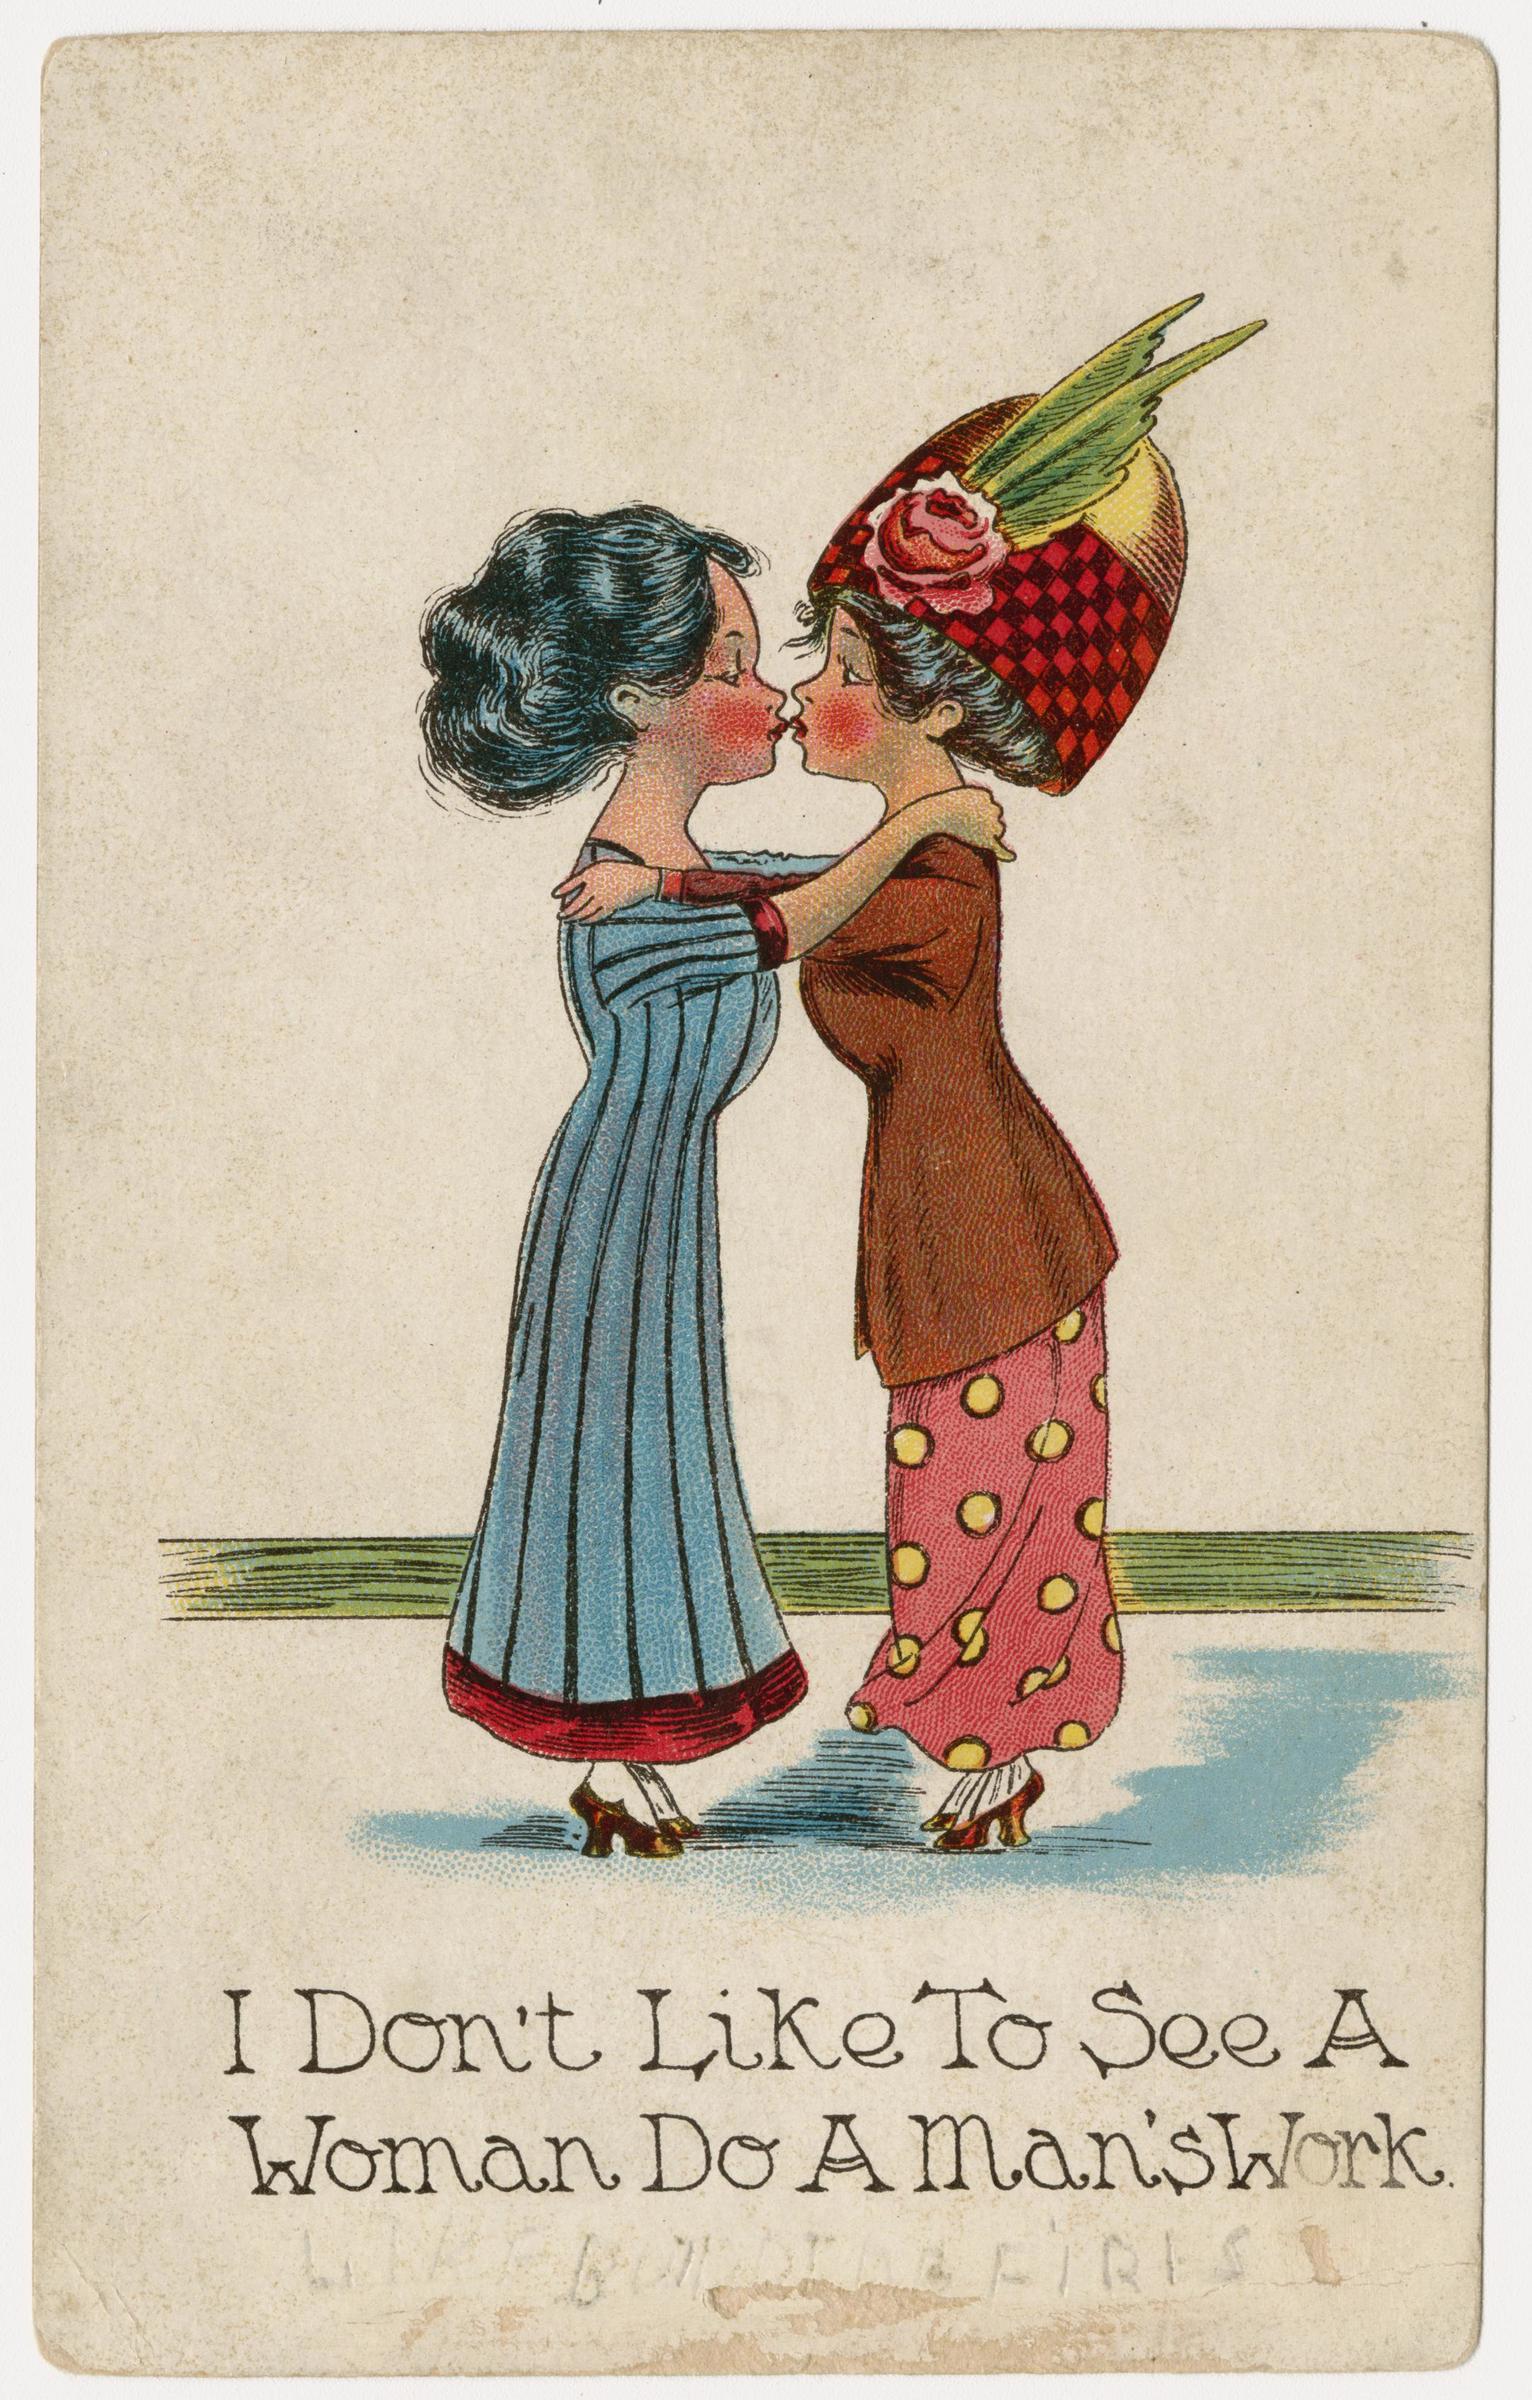 Two women kissing with caption, "I don't like to see a woman do a man's work."